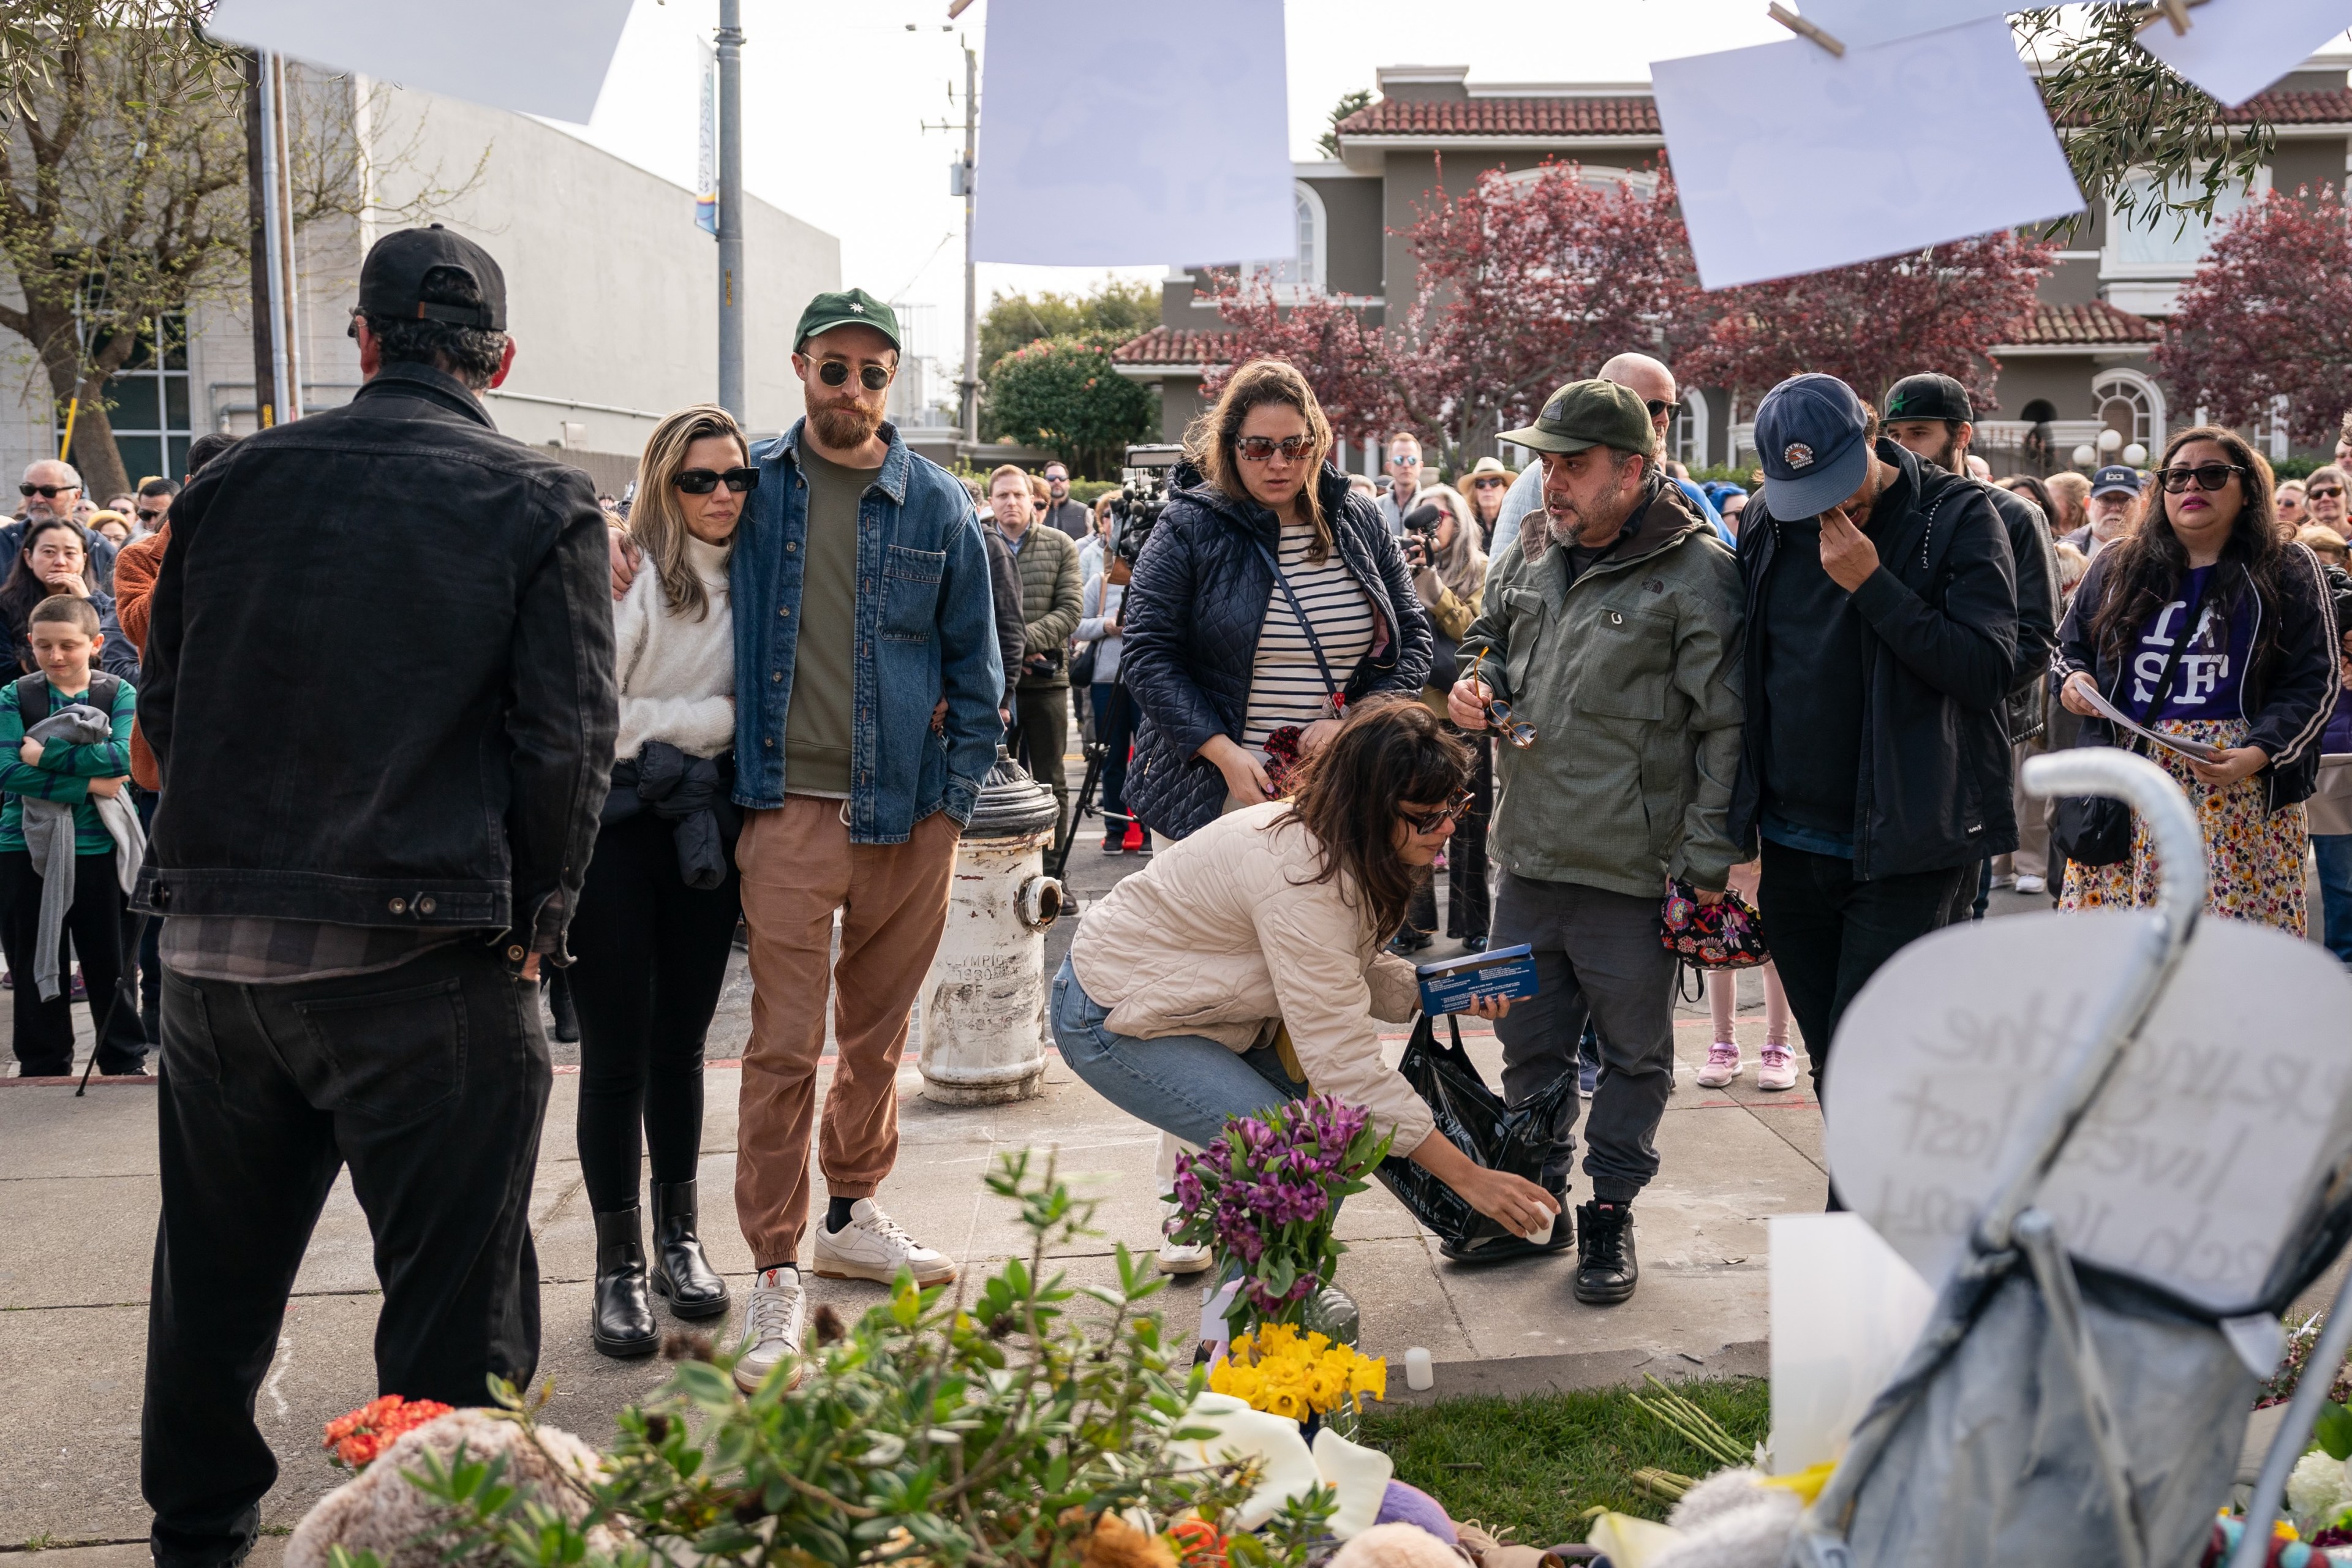 A group of people stands around a street memorial with flowers and messages. Some observe solemnly, while one woman adjusts an object.